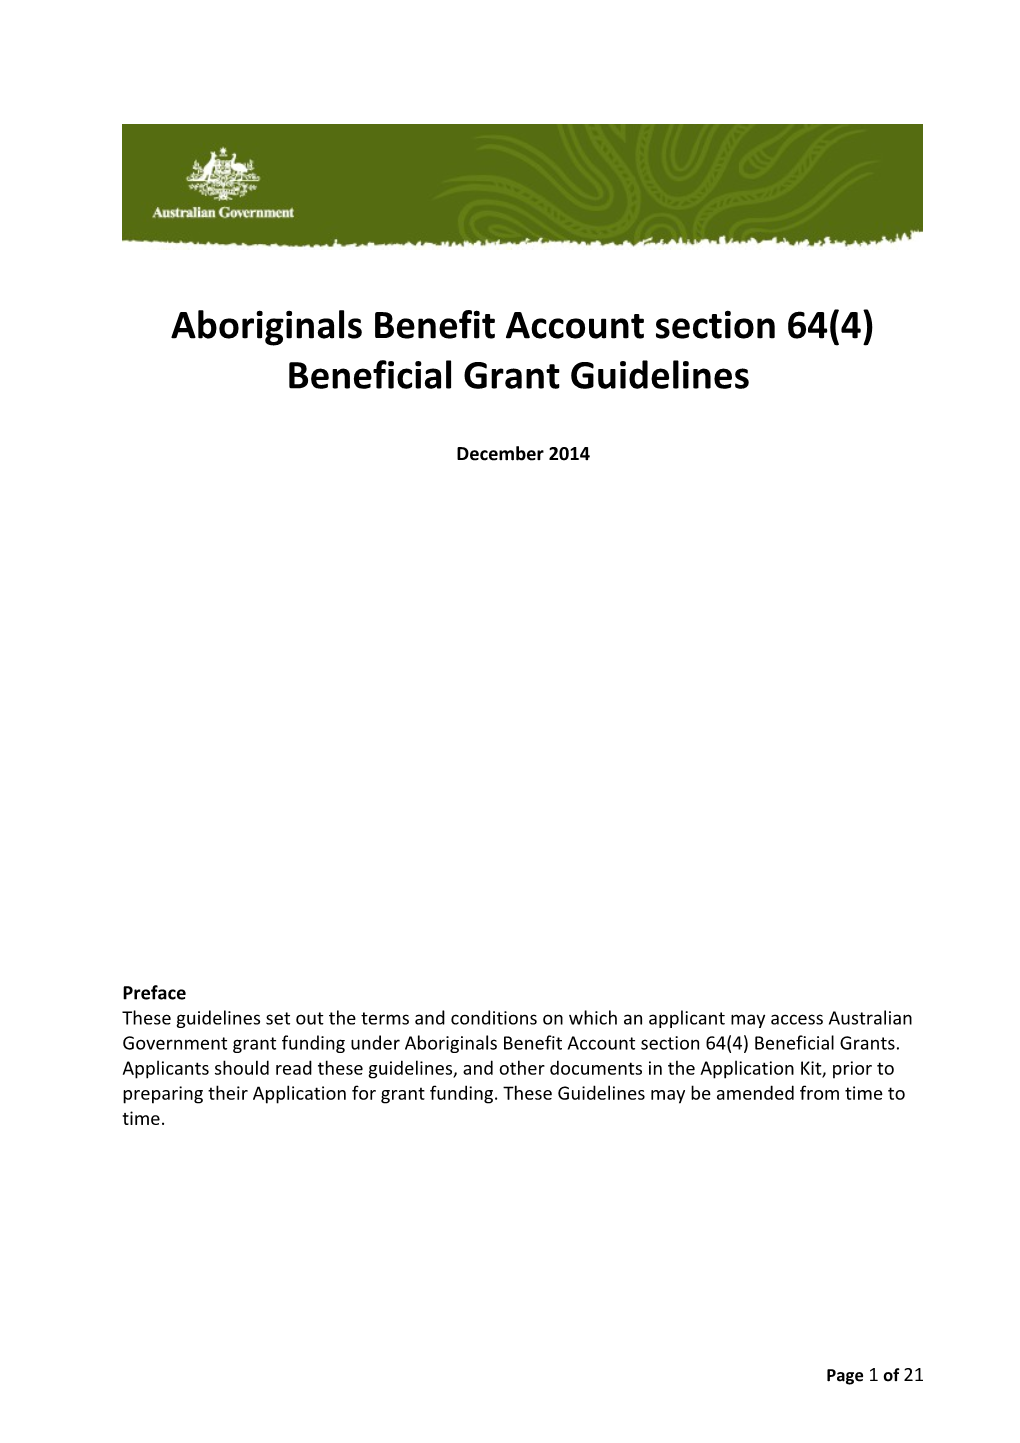 Aboriginals Benefit Account Section 64(4) Beneficial Grant Guidelines